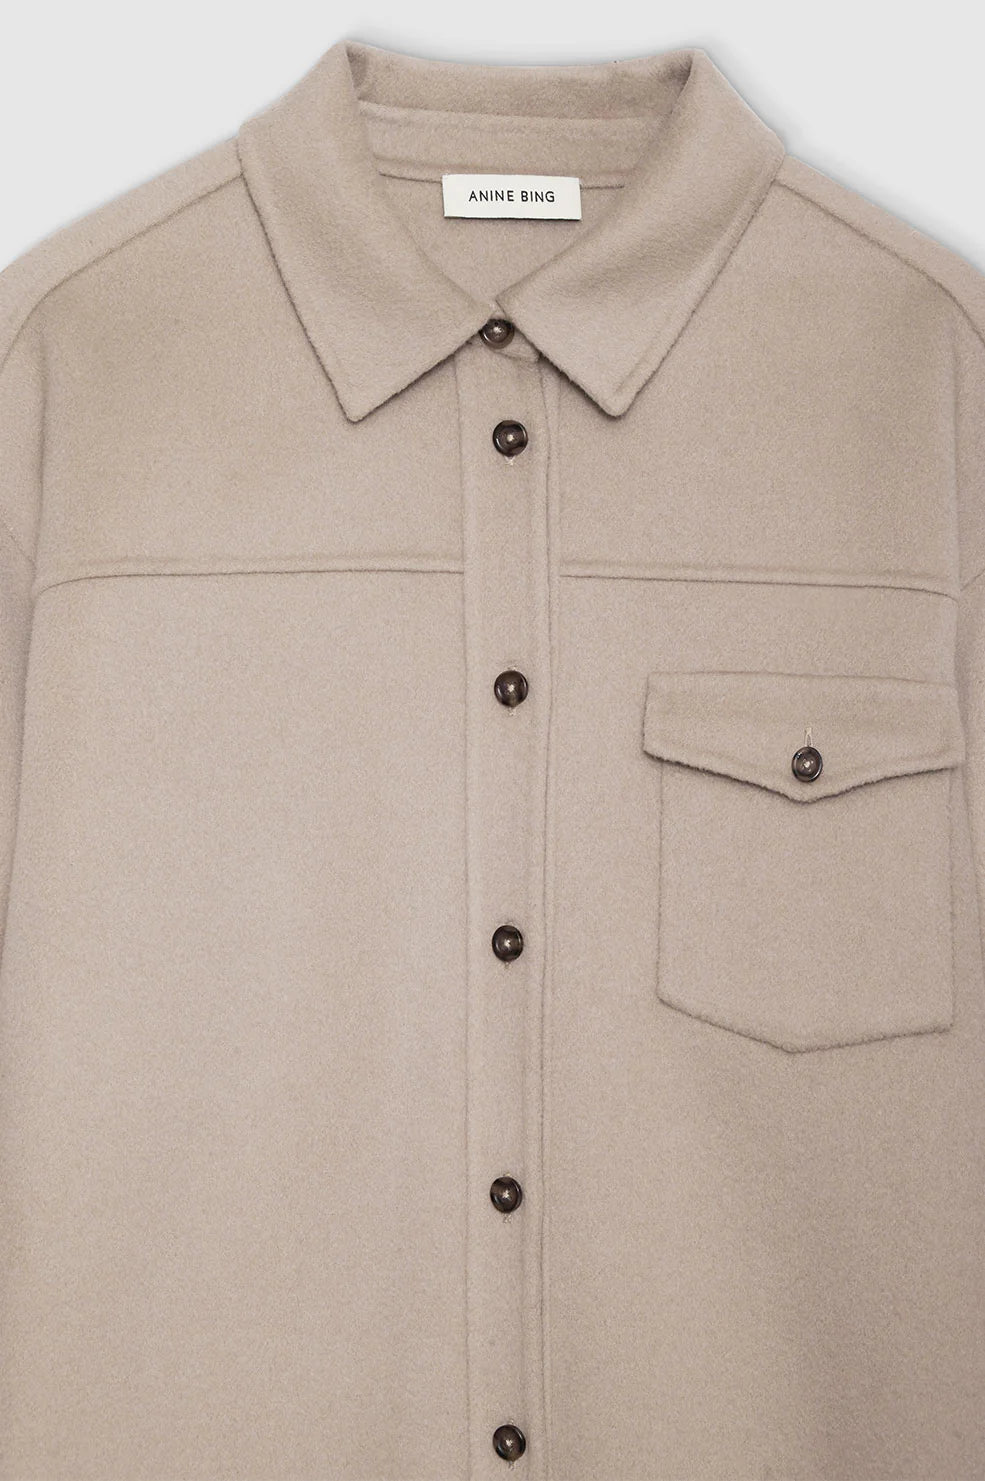 Sloan Shirt in Taupe Cashmere Blend